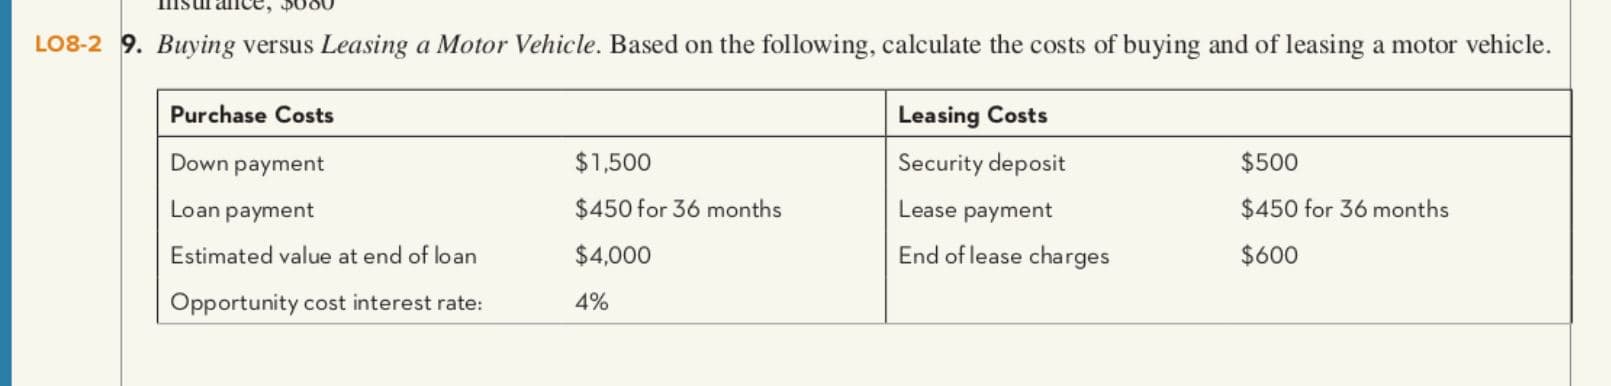 Isur ance, poou
LO8-2 9. Buying versus Leasing a Motor Vehicle. Based on the following, calculate the costs of buying and of leasing a motor vehicle.
Purchase Costs
Leasing Costs
Down payment
$1,500
Security deposit
$500
Loan payment
$450 for 36 months
Lease payment
$450 for 36 months
Estimated value at end of loan
$4,000
End of lease charges
$600
Opportunity cost interest rate:
4%
